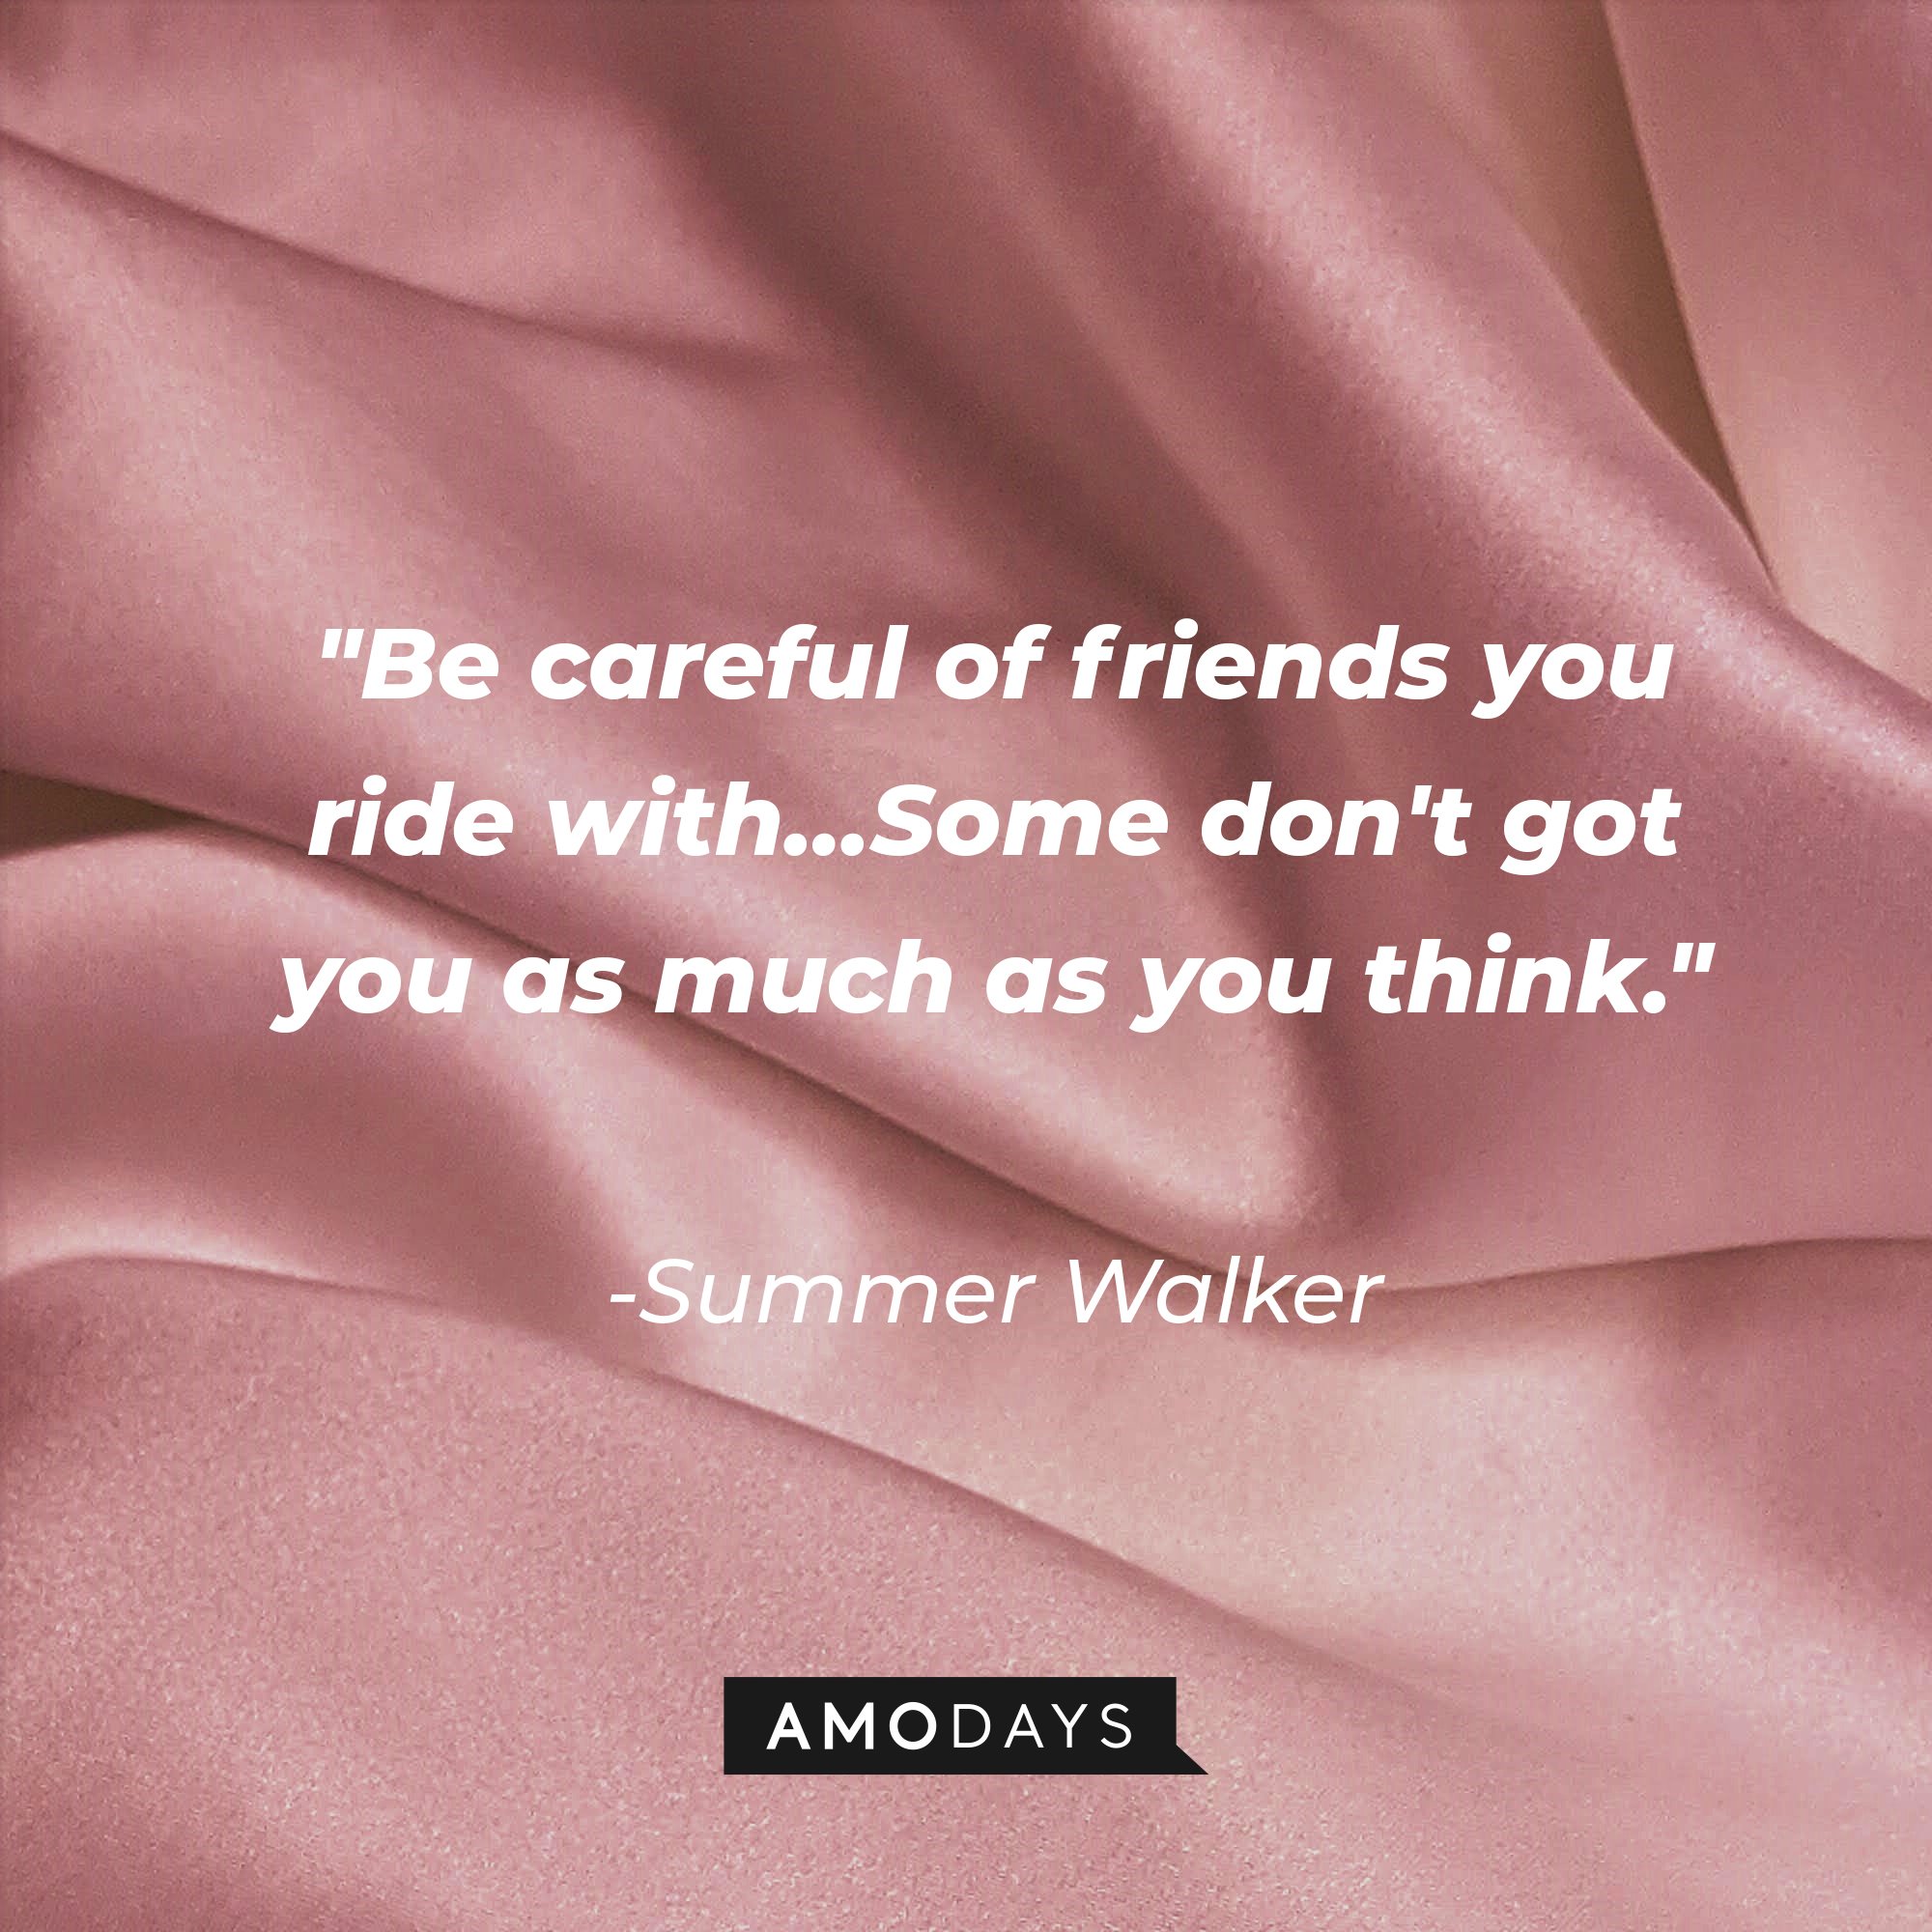 Summer Walker's quote: "Be careful of friends you ride with… Some don't got you as much as you think." | Image: AmoDays